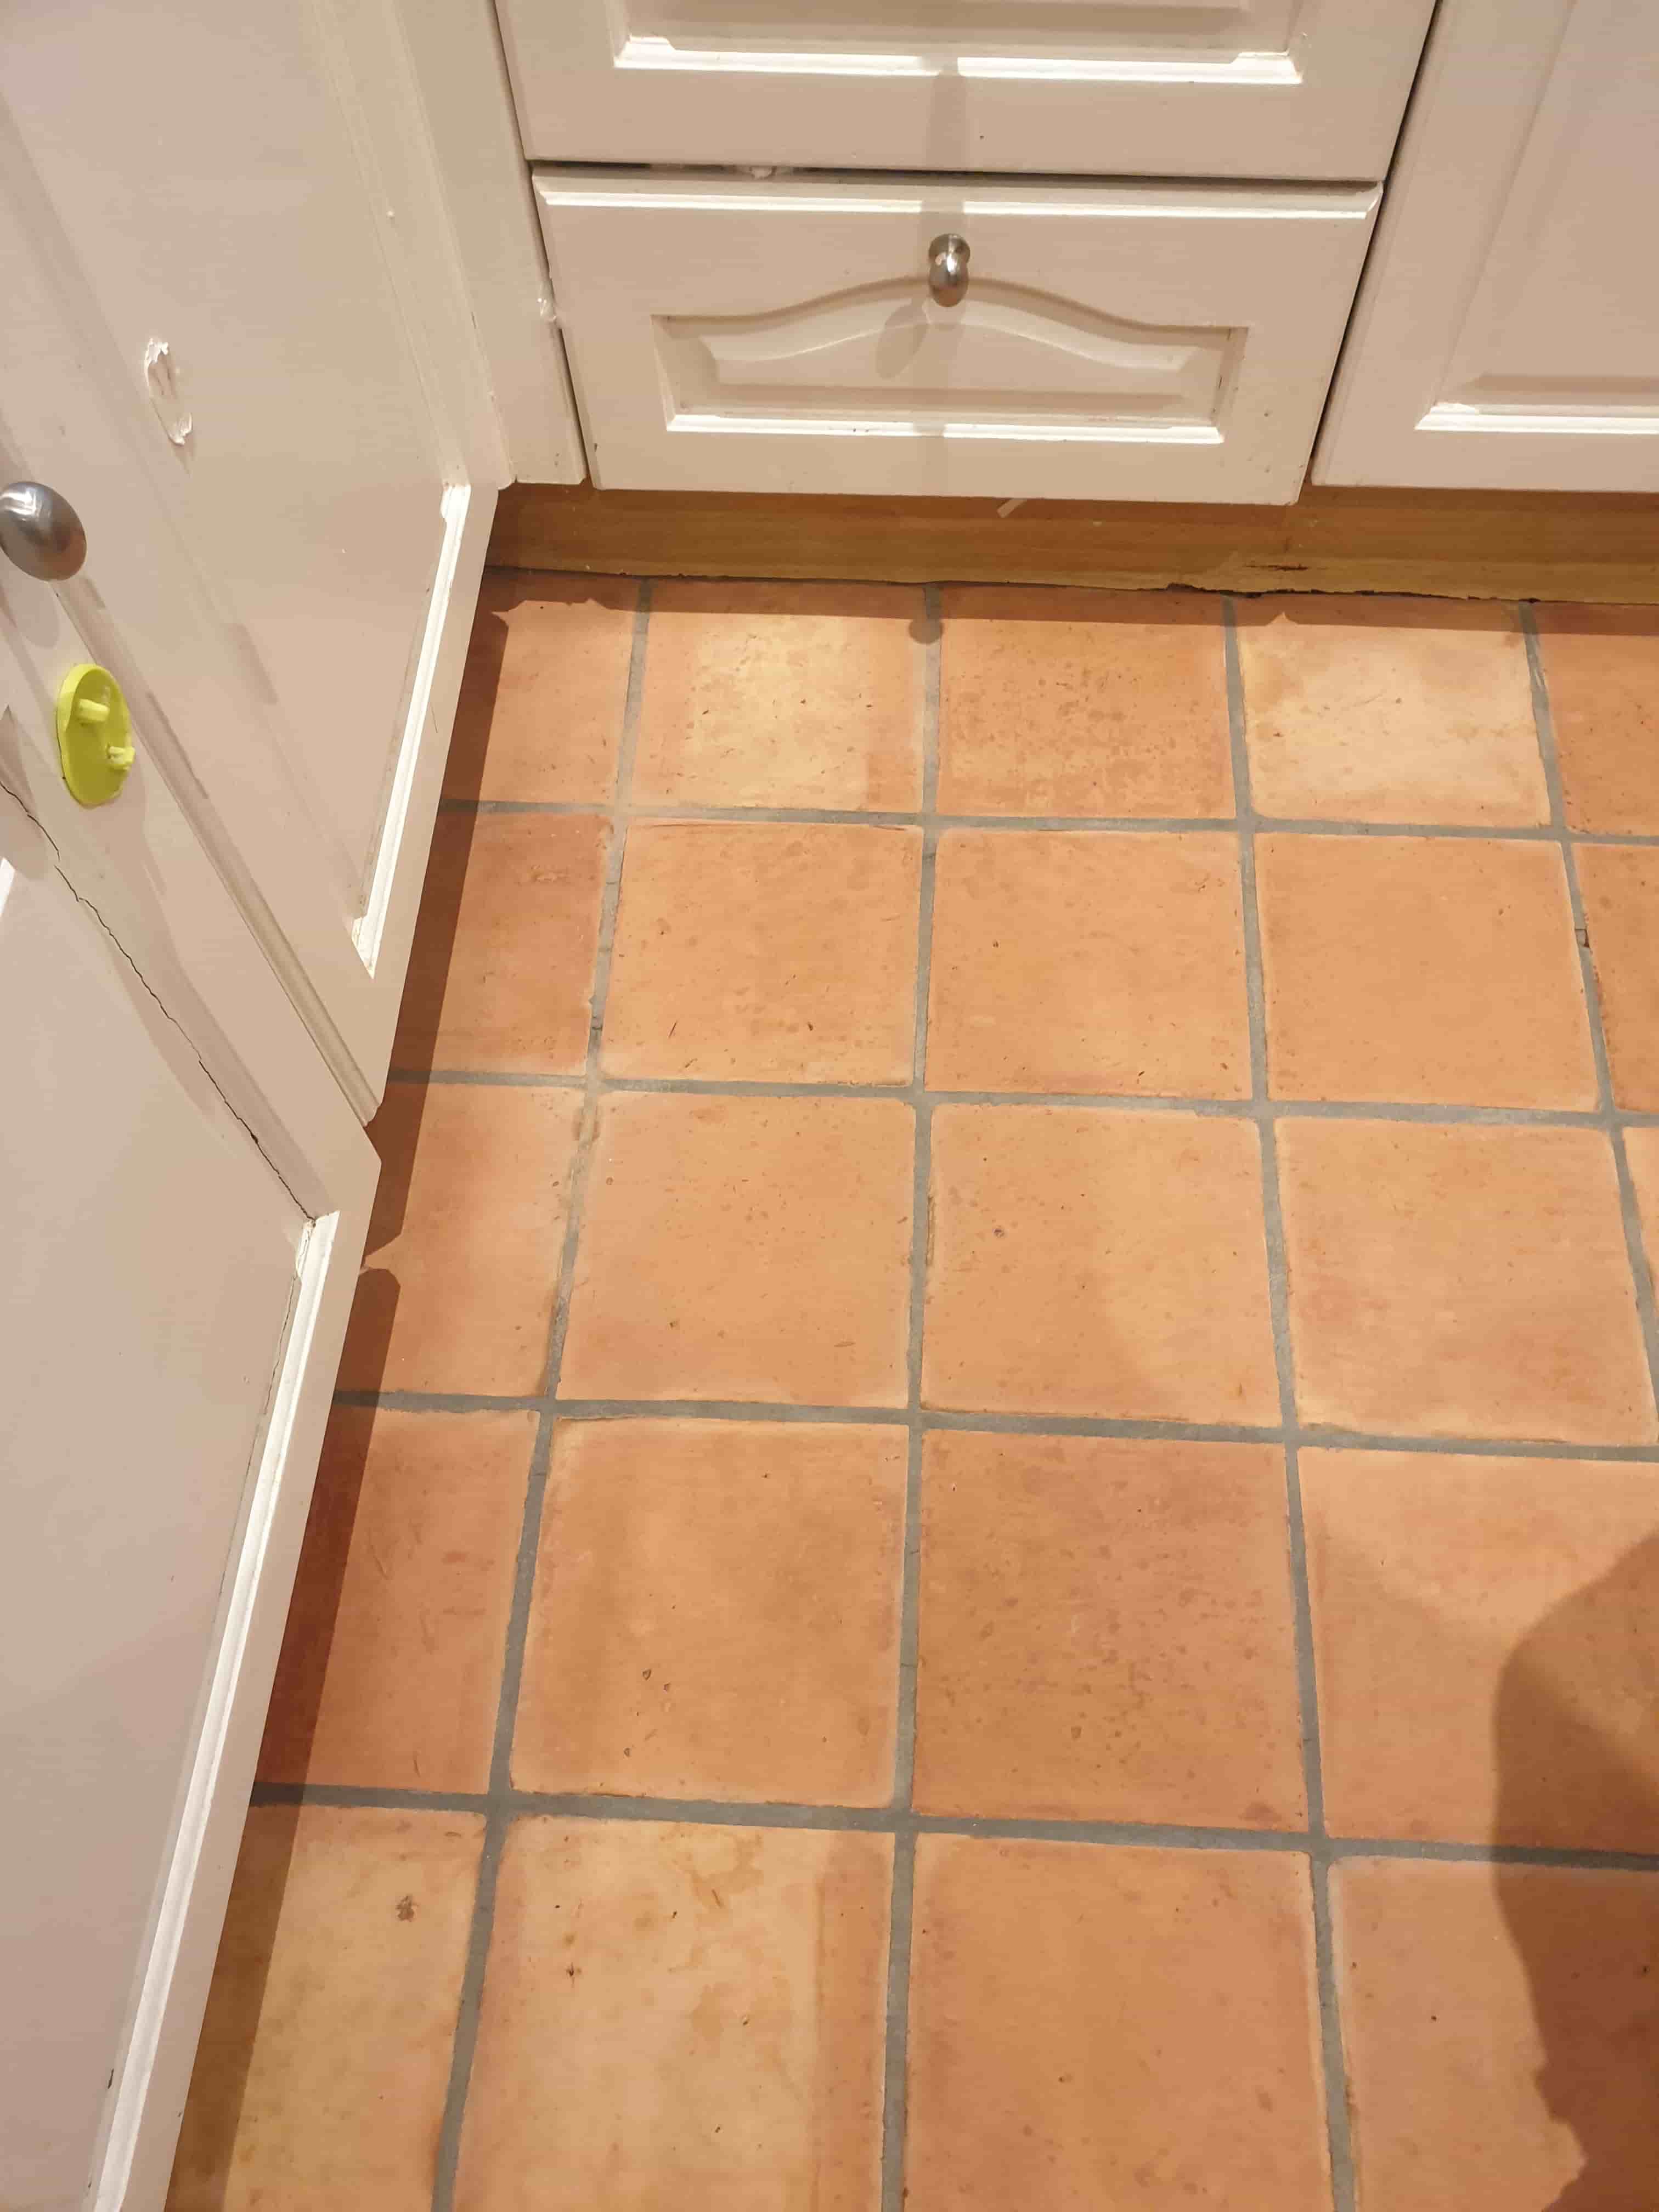 Terracotta Tiled Kitchen Floor After Cleaning Whightgate Northwich